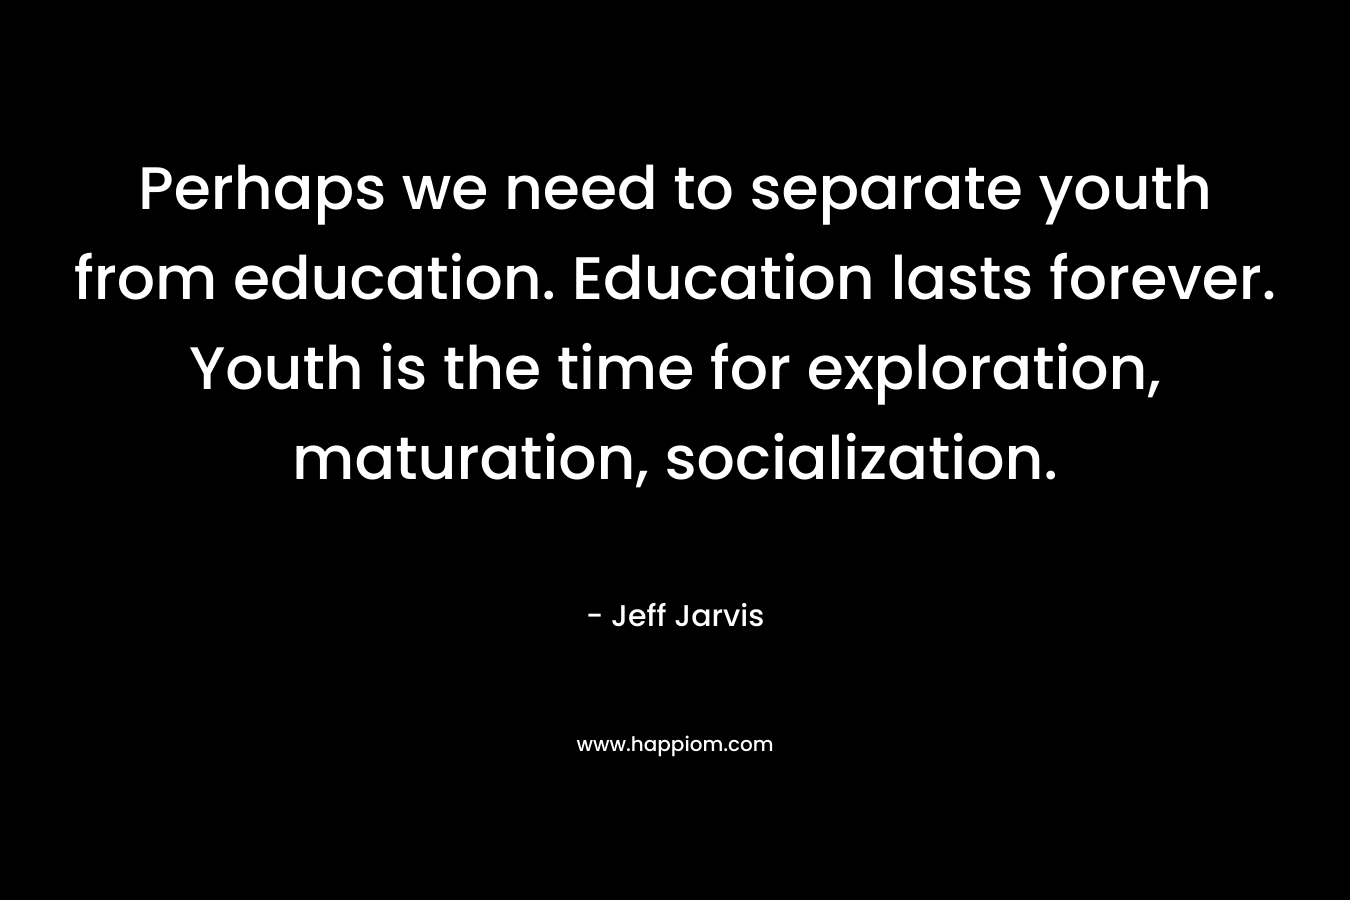 Perhaps we need to separate youth from education. Education lasts forever. Youth is the time for exploration, maturation, socialization. – Jeff Jarvis